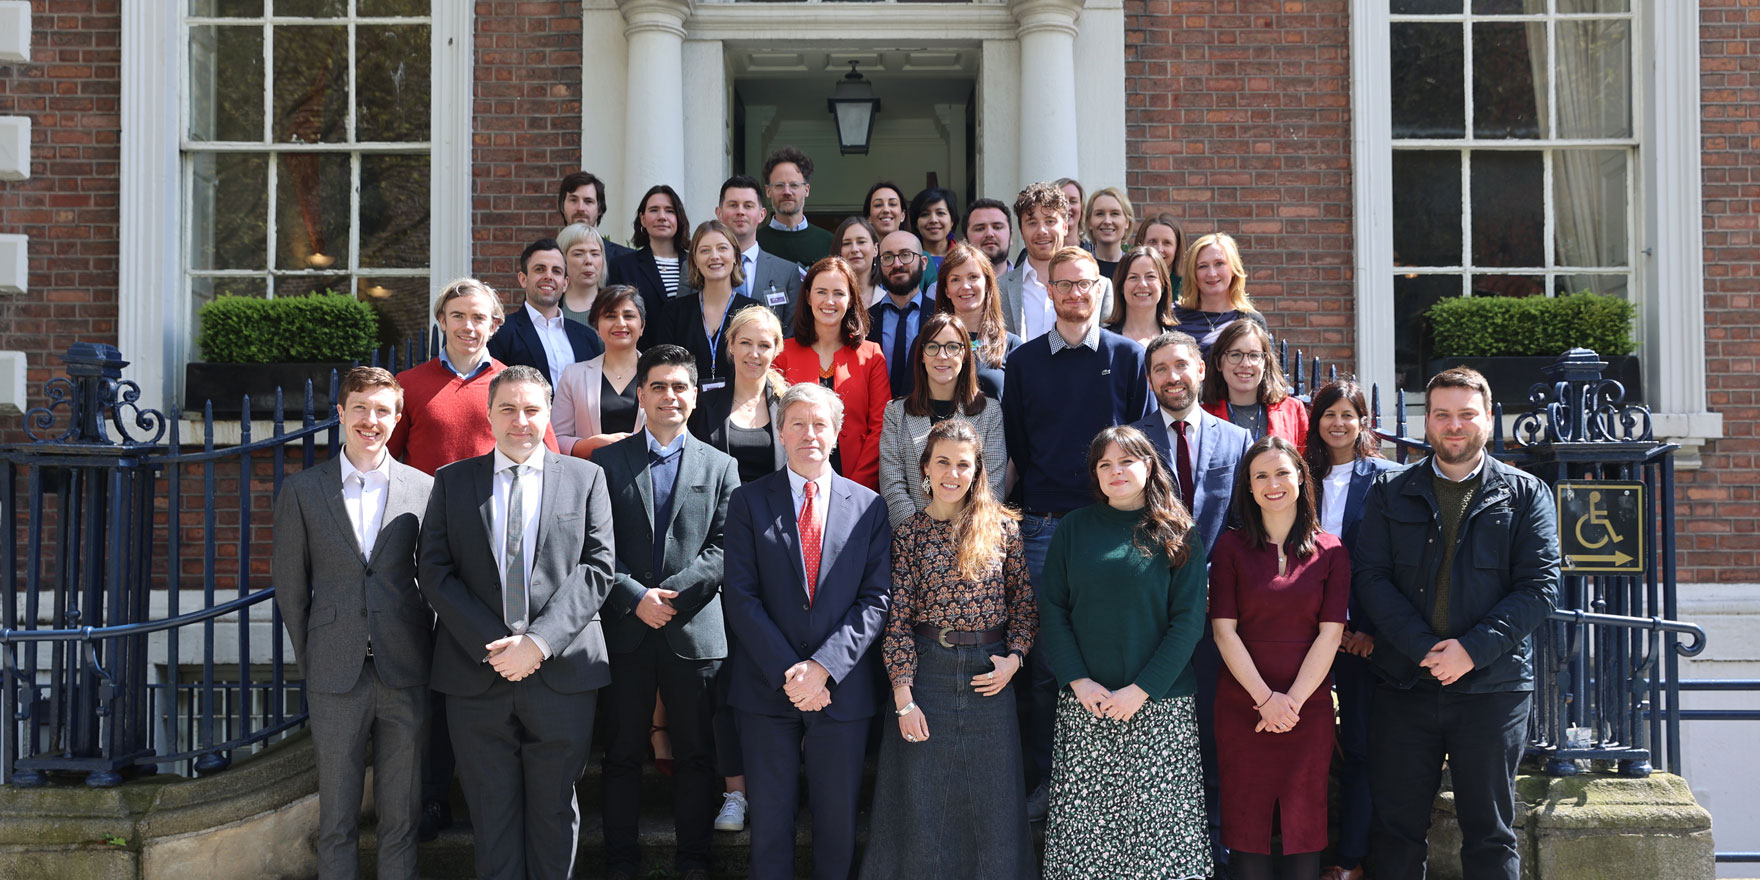 The President of the Royal Irish Academy, Pat Guiry welcomed the first cohort of Young Academy Ireland members to the Royal Irish Academy on Tuesday, 25 April 2023